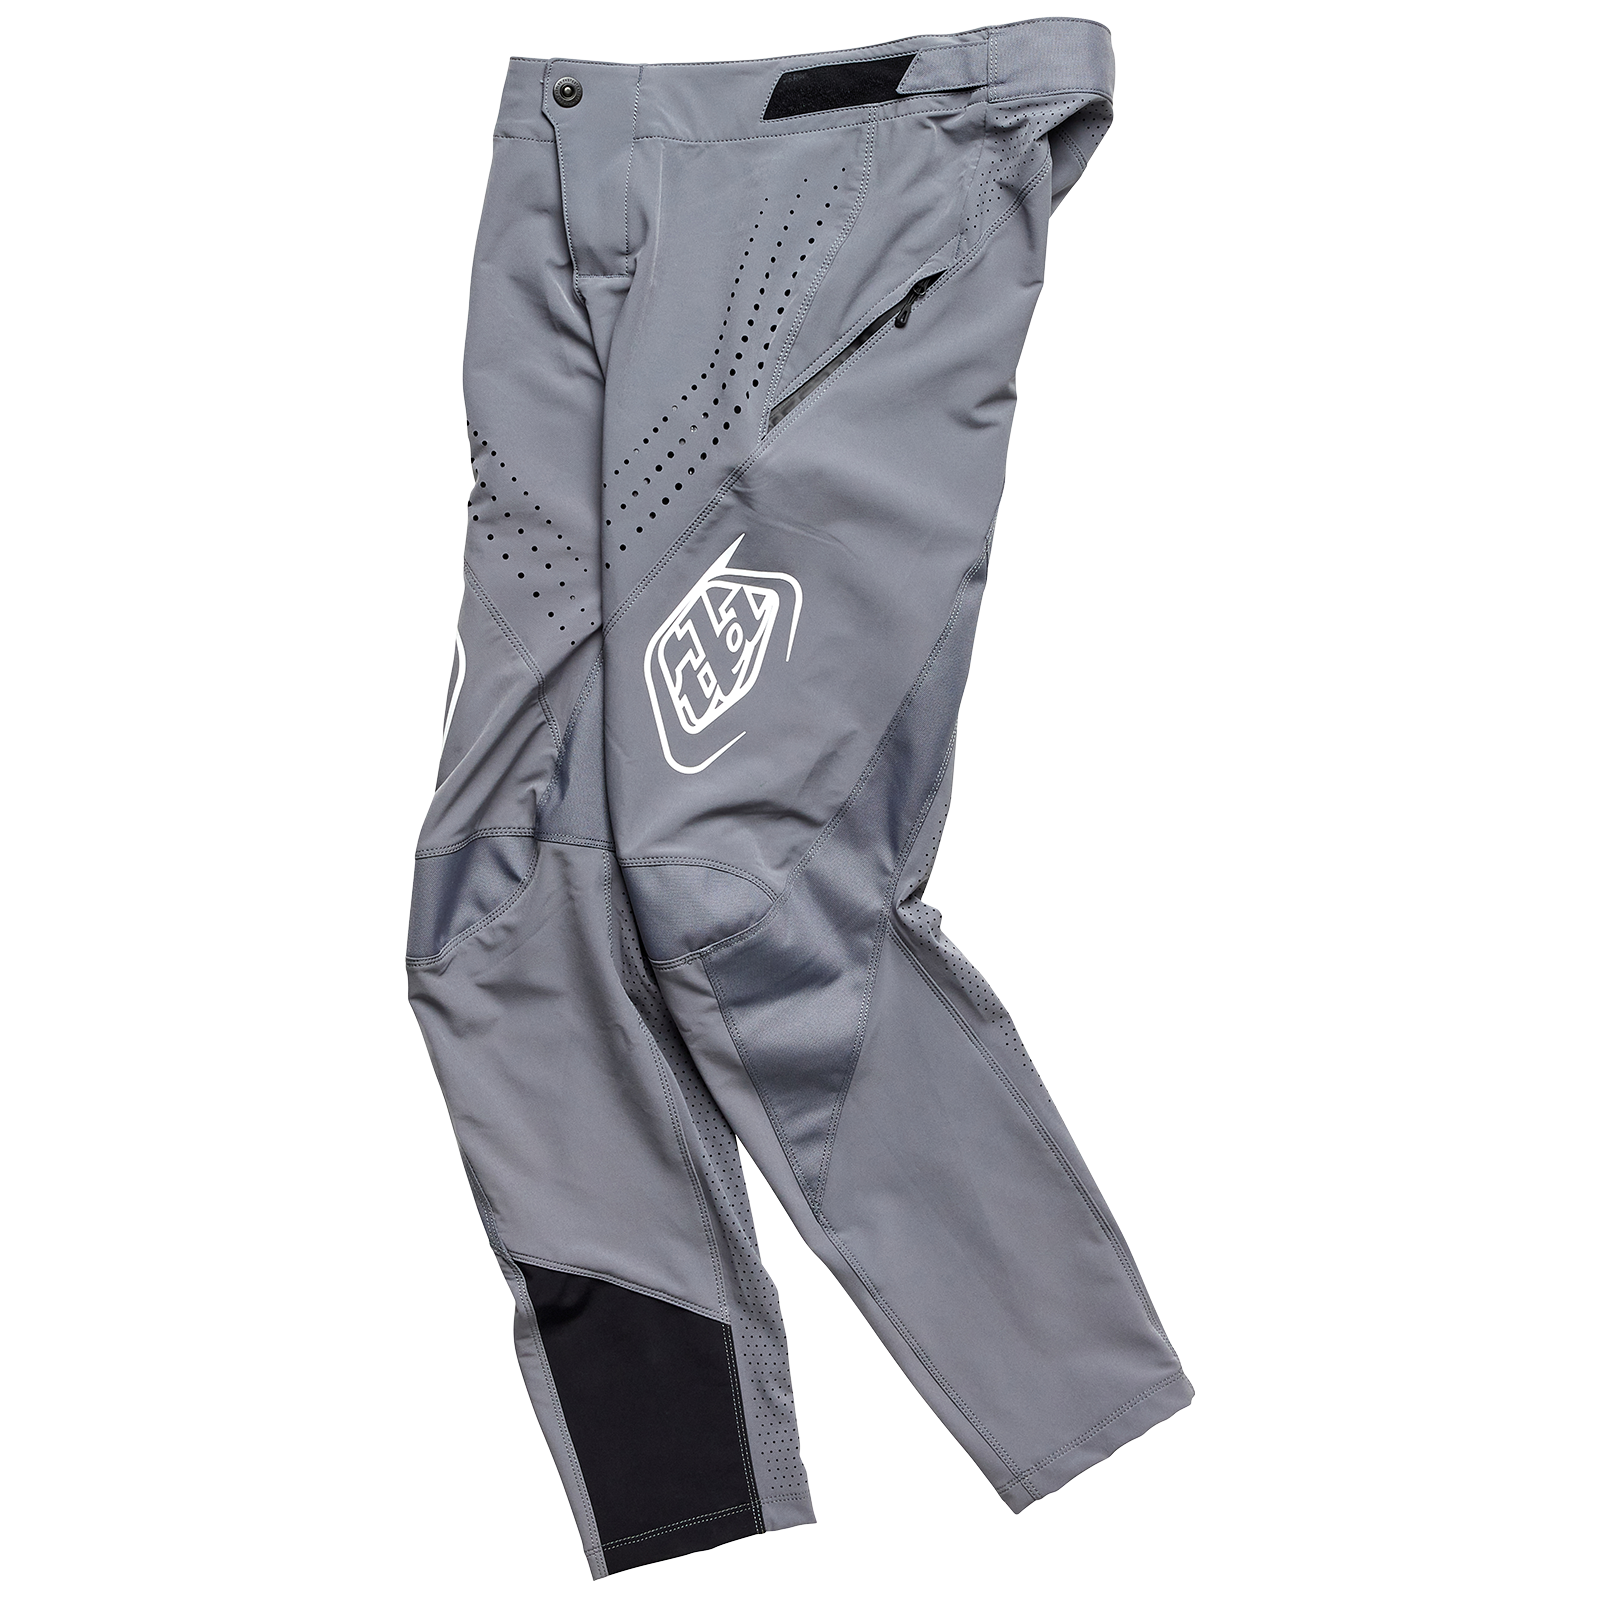 Pair of TLD Youth Sprint Pant Mono Charcoal, BMX racing pant, with durable material, ventilation holes, and a logo on the thigh.